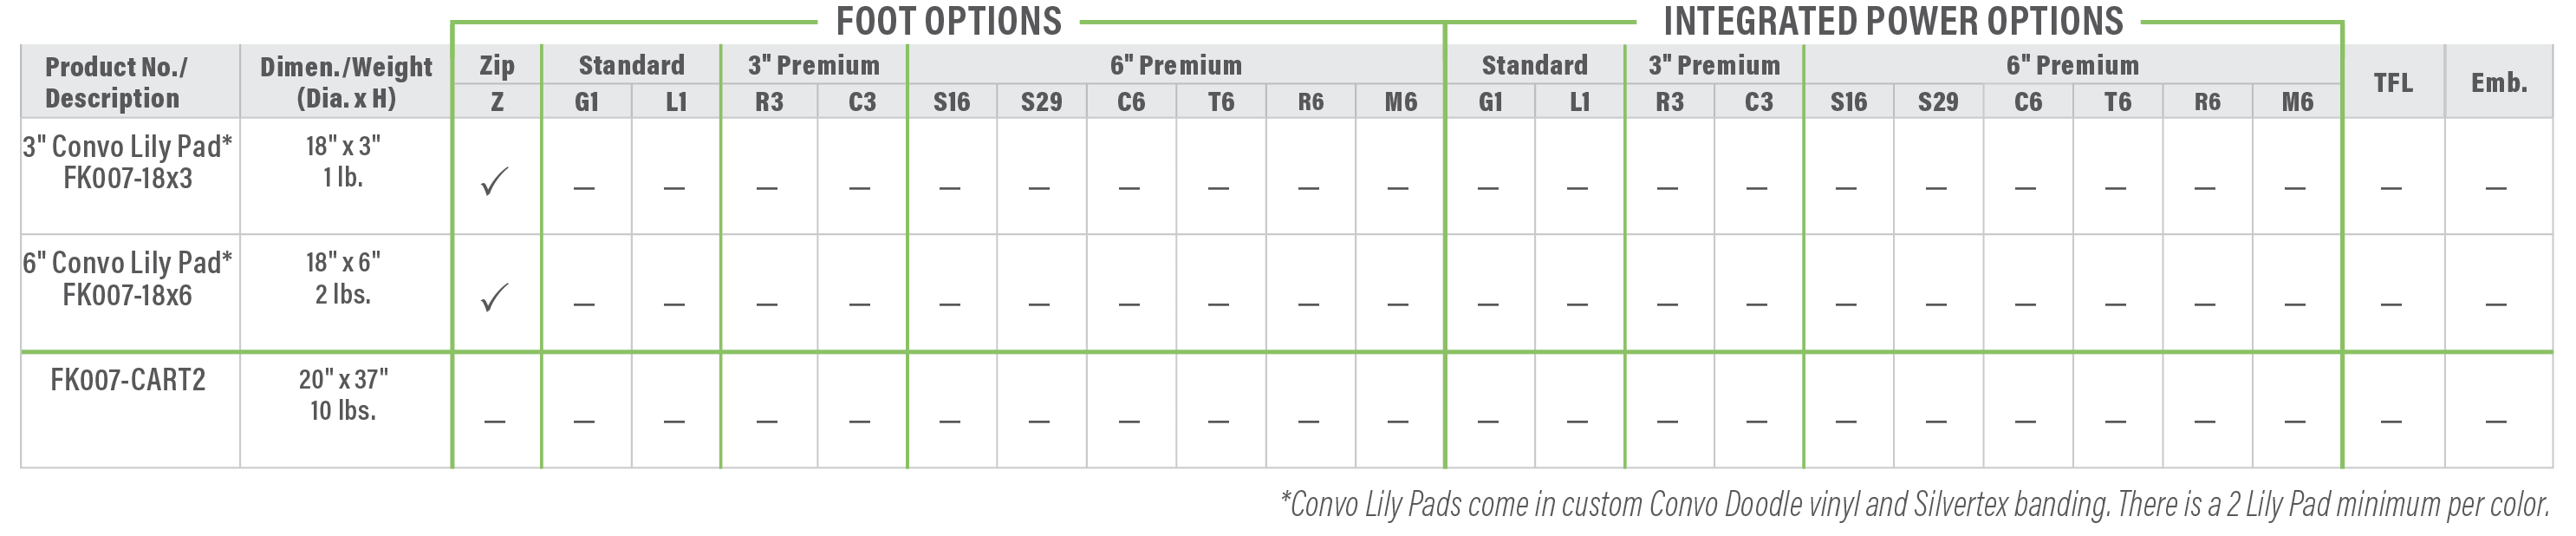 Convo Lily Pad and Cart Combo Product Breakdown